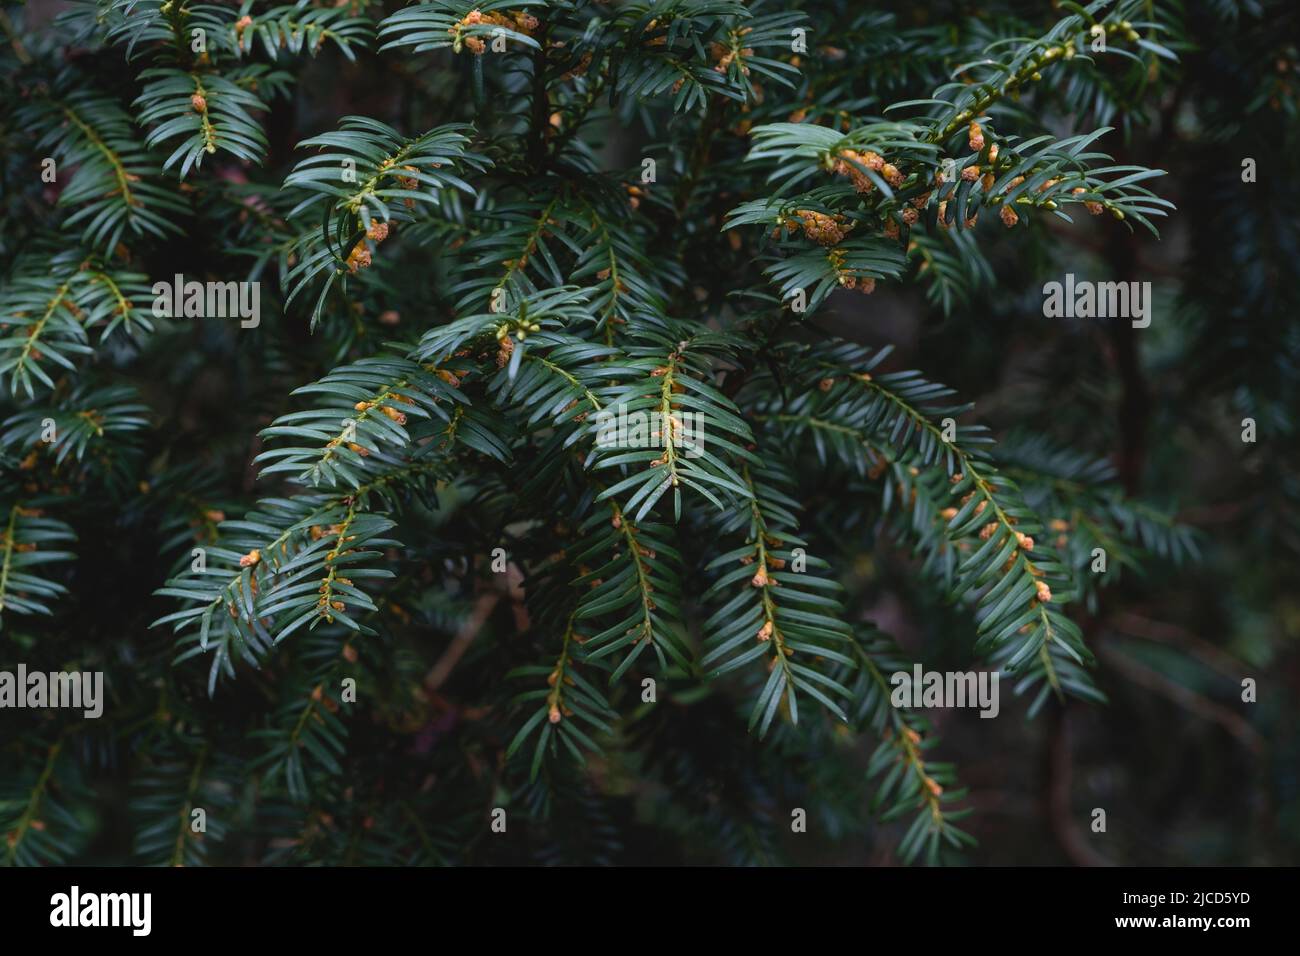 Taxus Baccata or European yew dark green foliage and male flowers Stock Photo